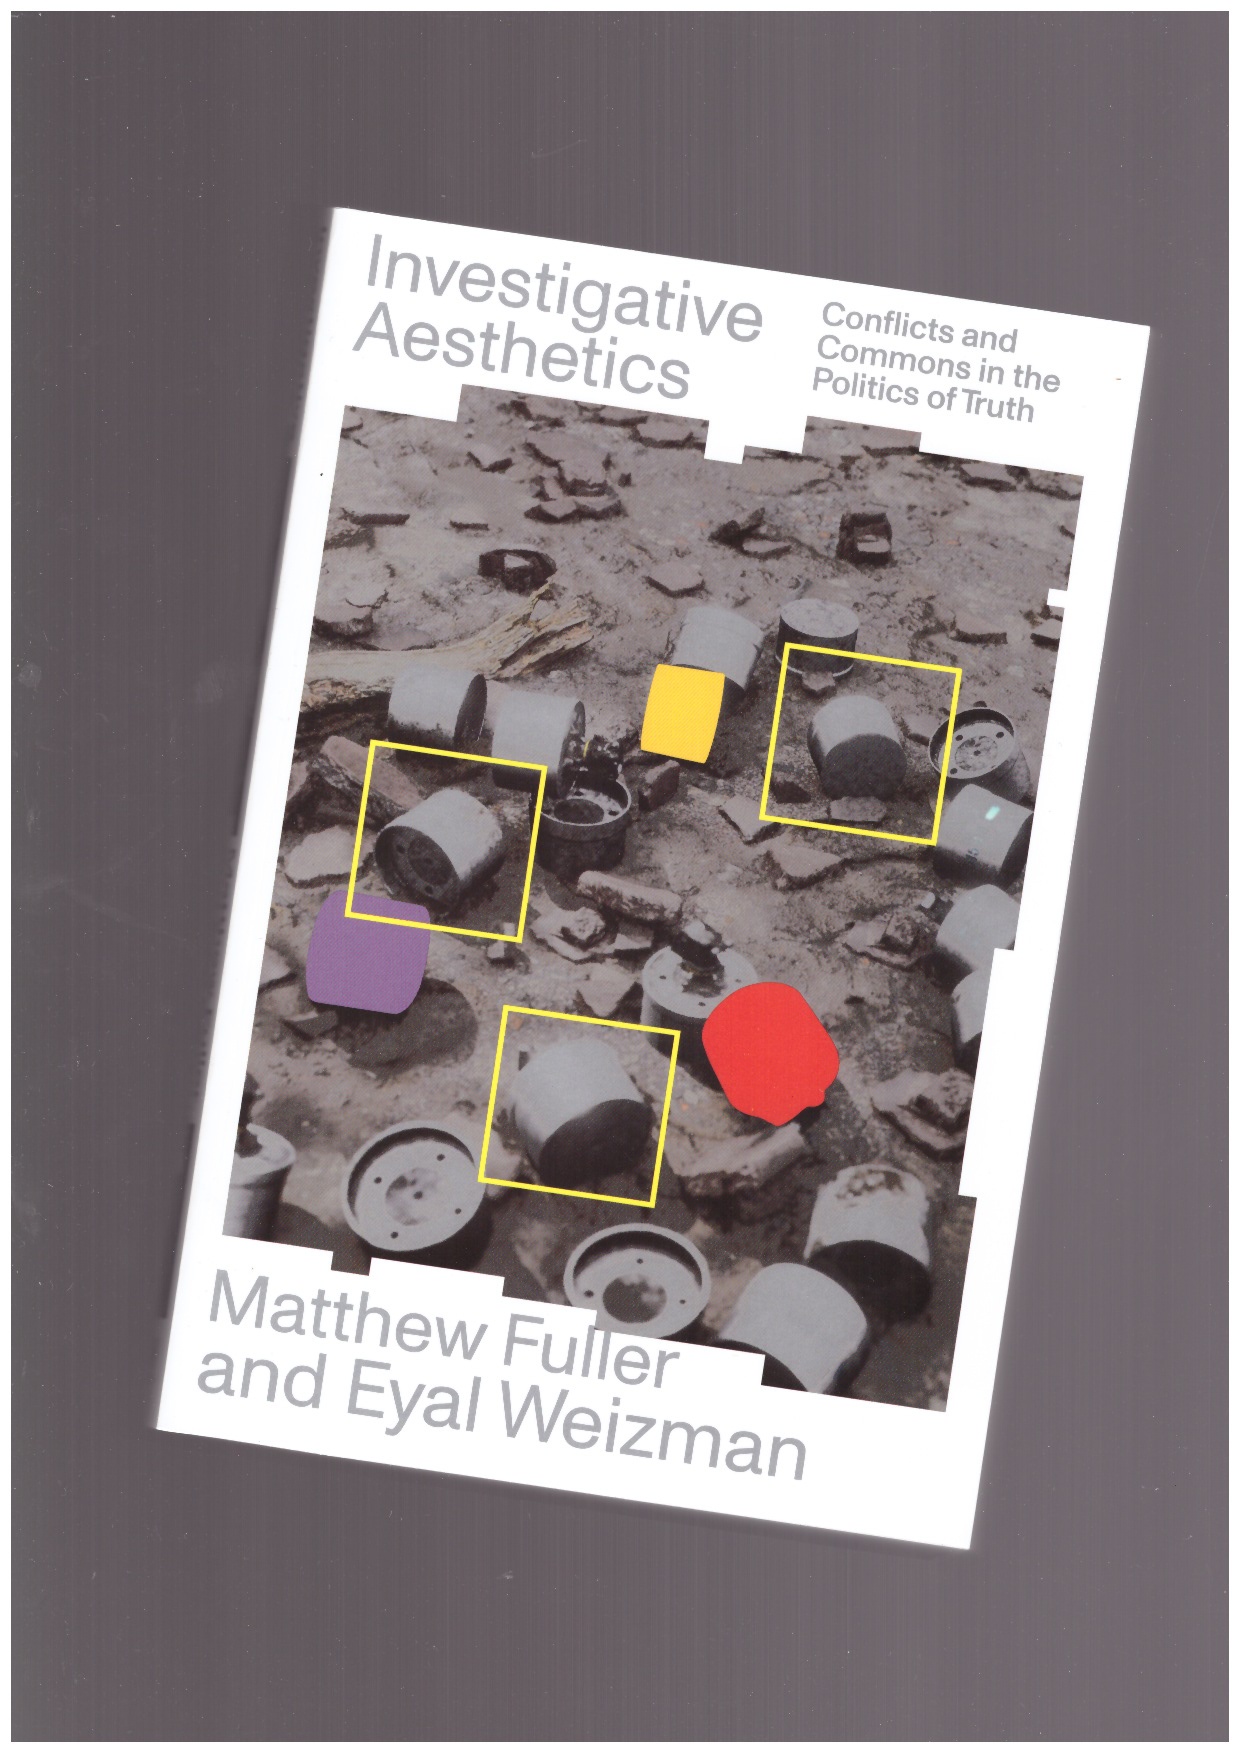 FULLER, Matthew; WEIZMAN, Eyal - Investigative Aesthetics. Conflicts and Commons in the Politics of Truth